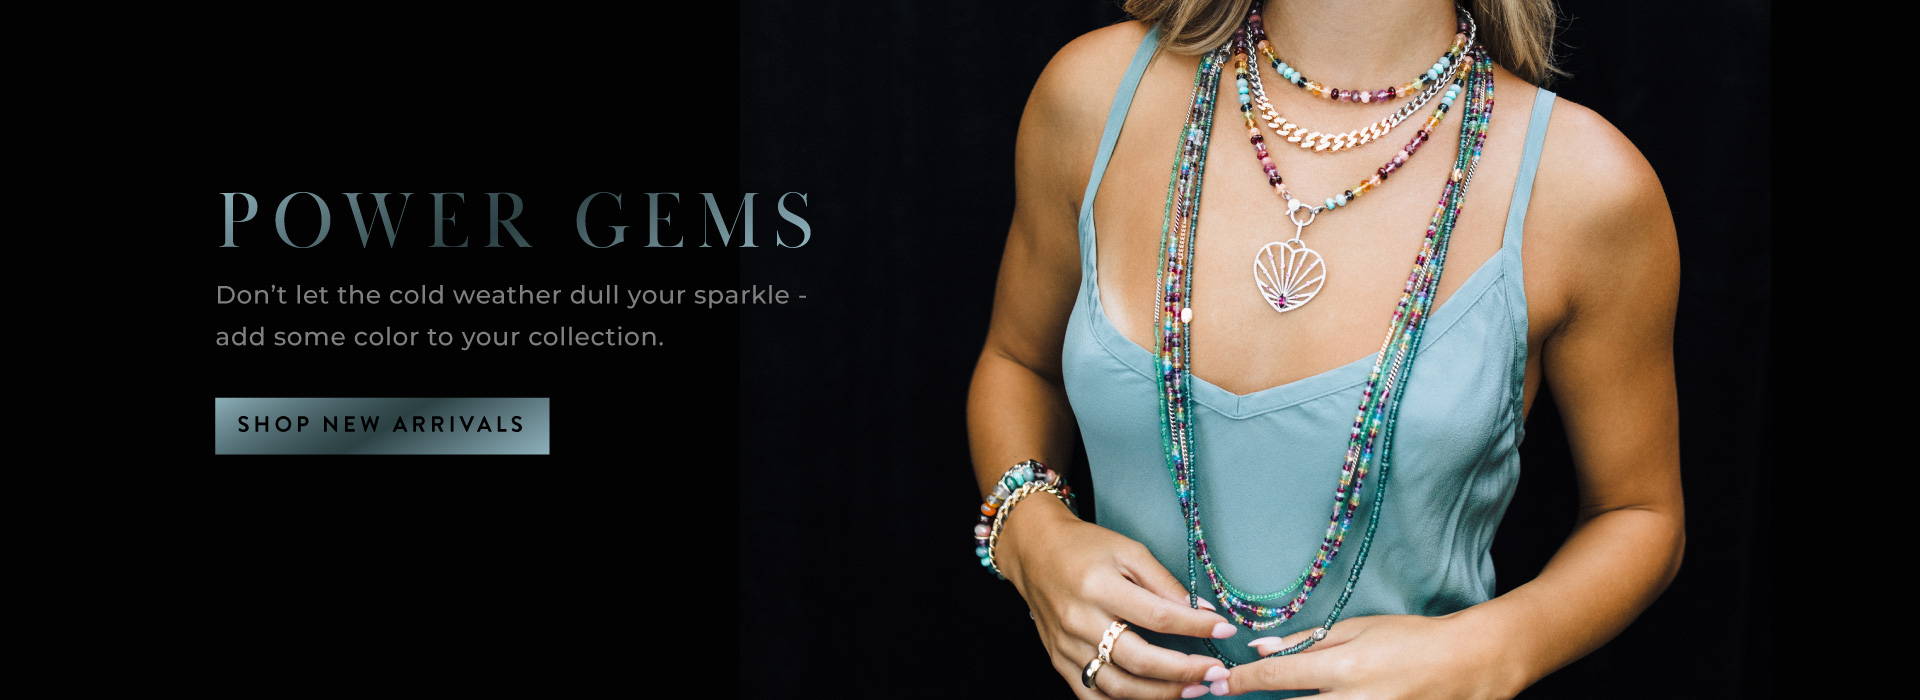 Power Gems - Don't let the cold weather dull your  sparkle - add some color to your collection!